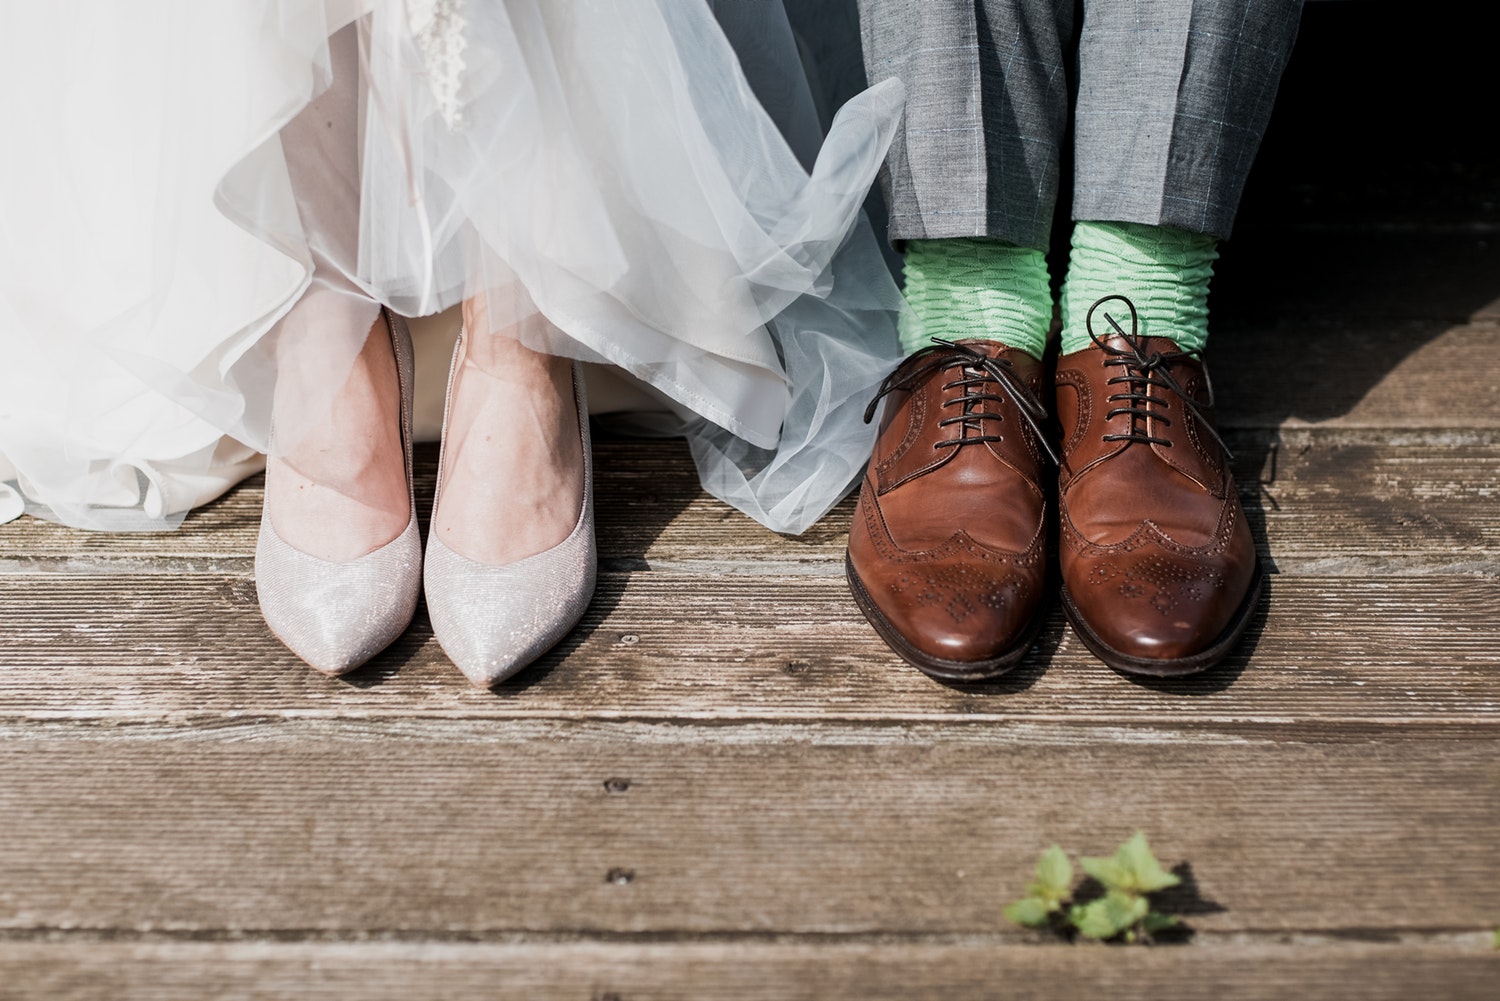 Pairs of men's and women's wedding shoes